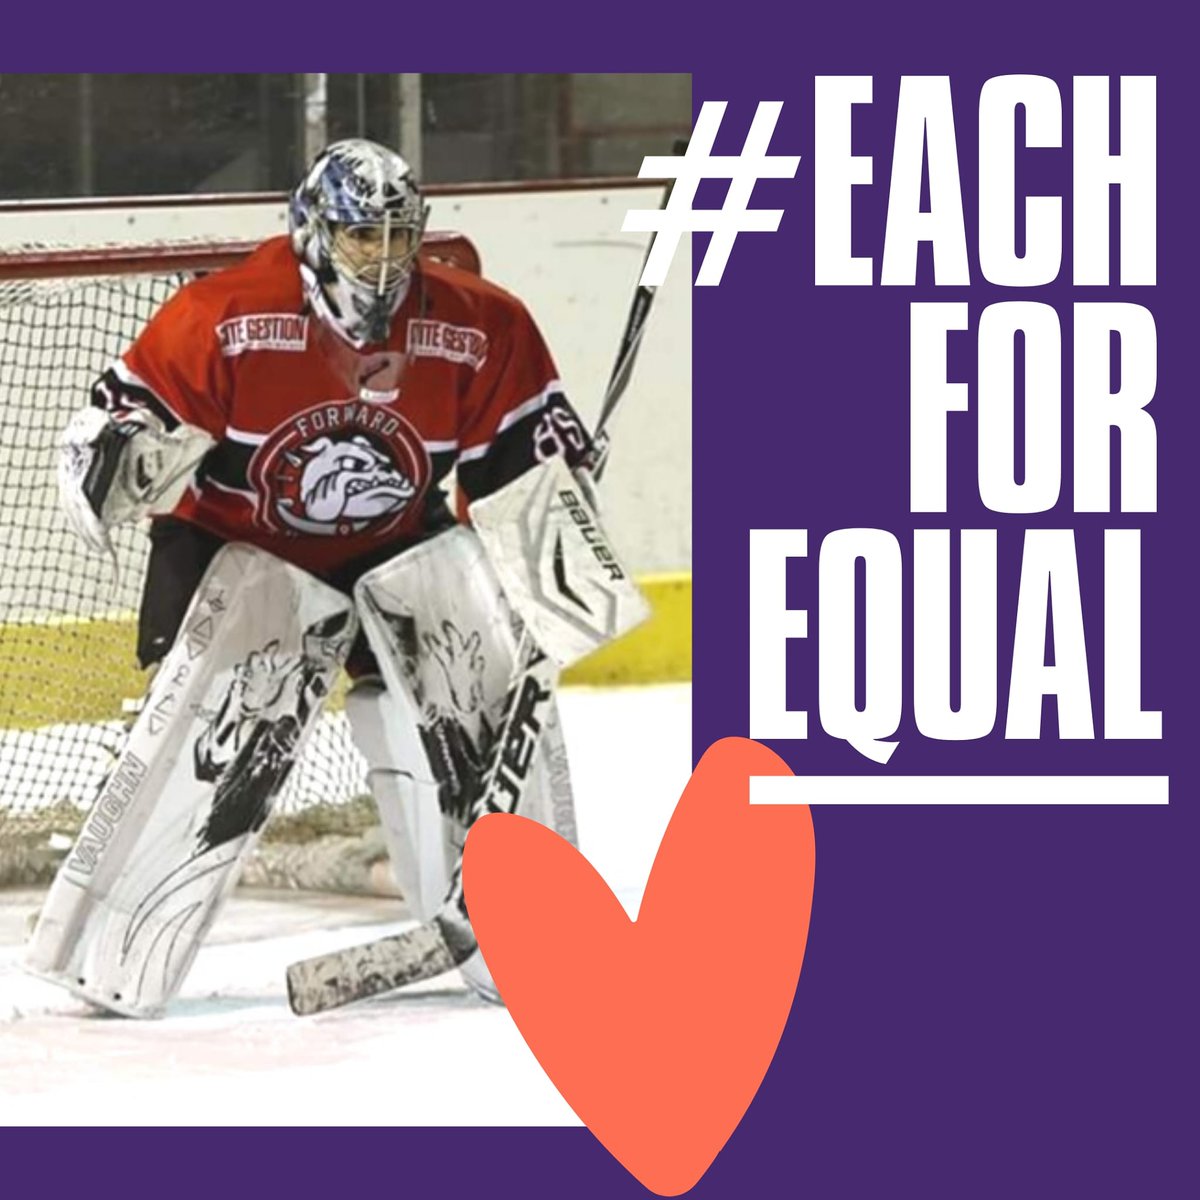 Each of us is responsible for Equality. 😌💖🏒🥅
#EachForEqual #IWD2020 #InternationalWomensDay #STRONG #FIERCE #POWERFUL #PASSIONATE #INSPIRED #TryAndStopUs #EqualPlayingField